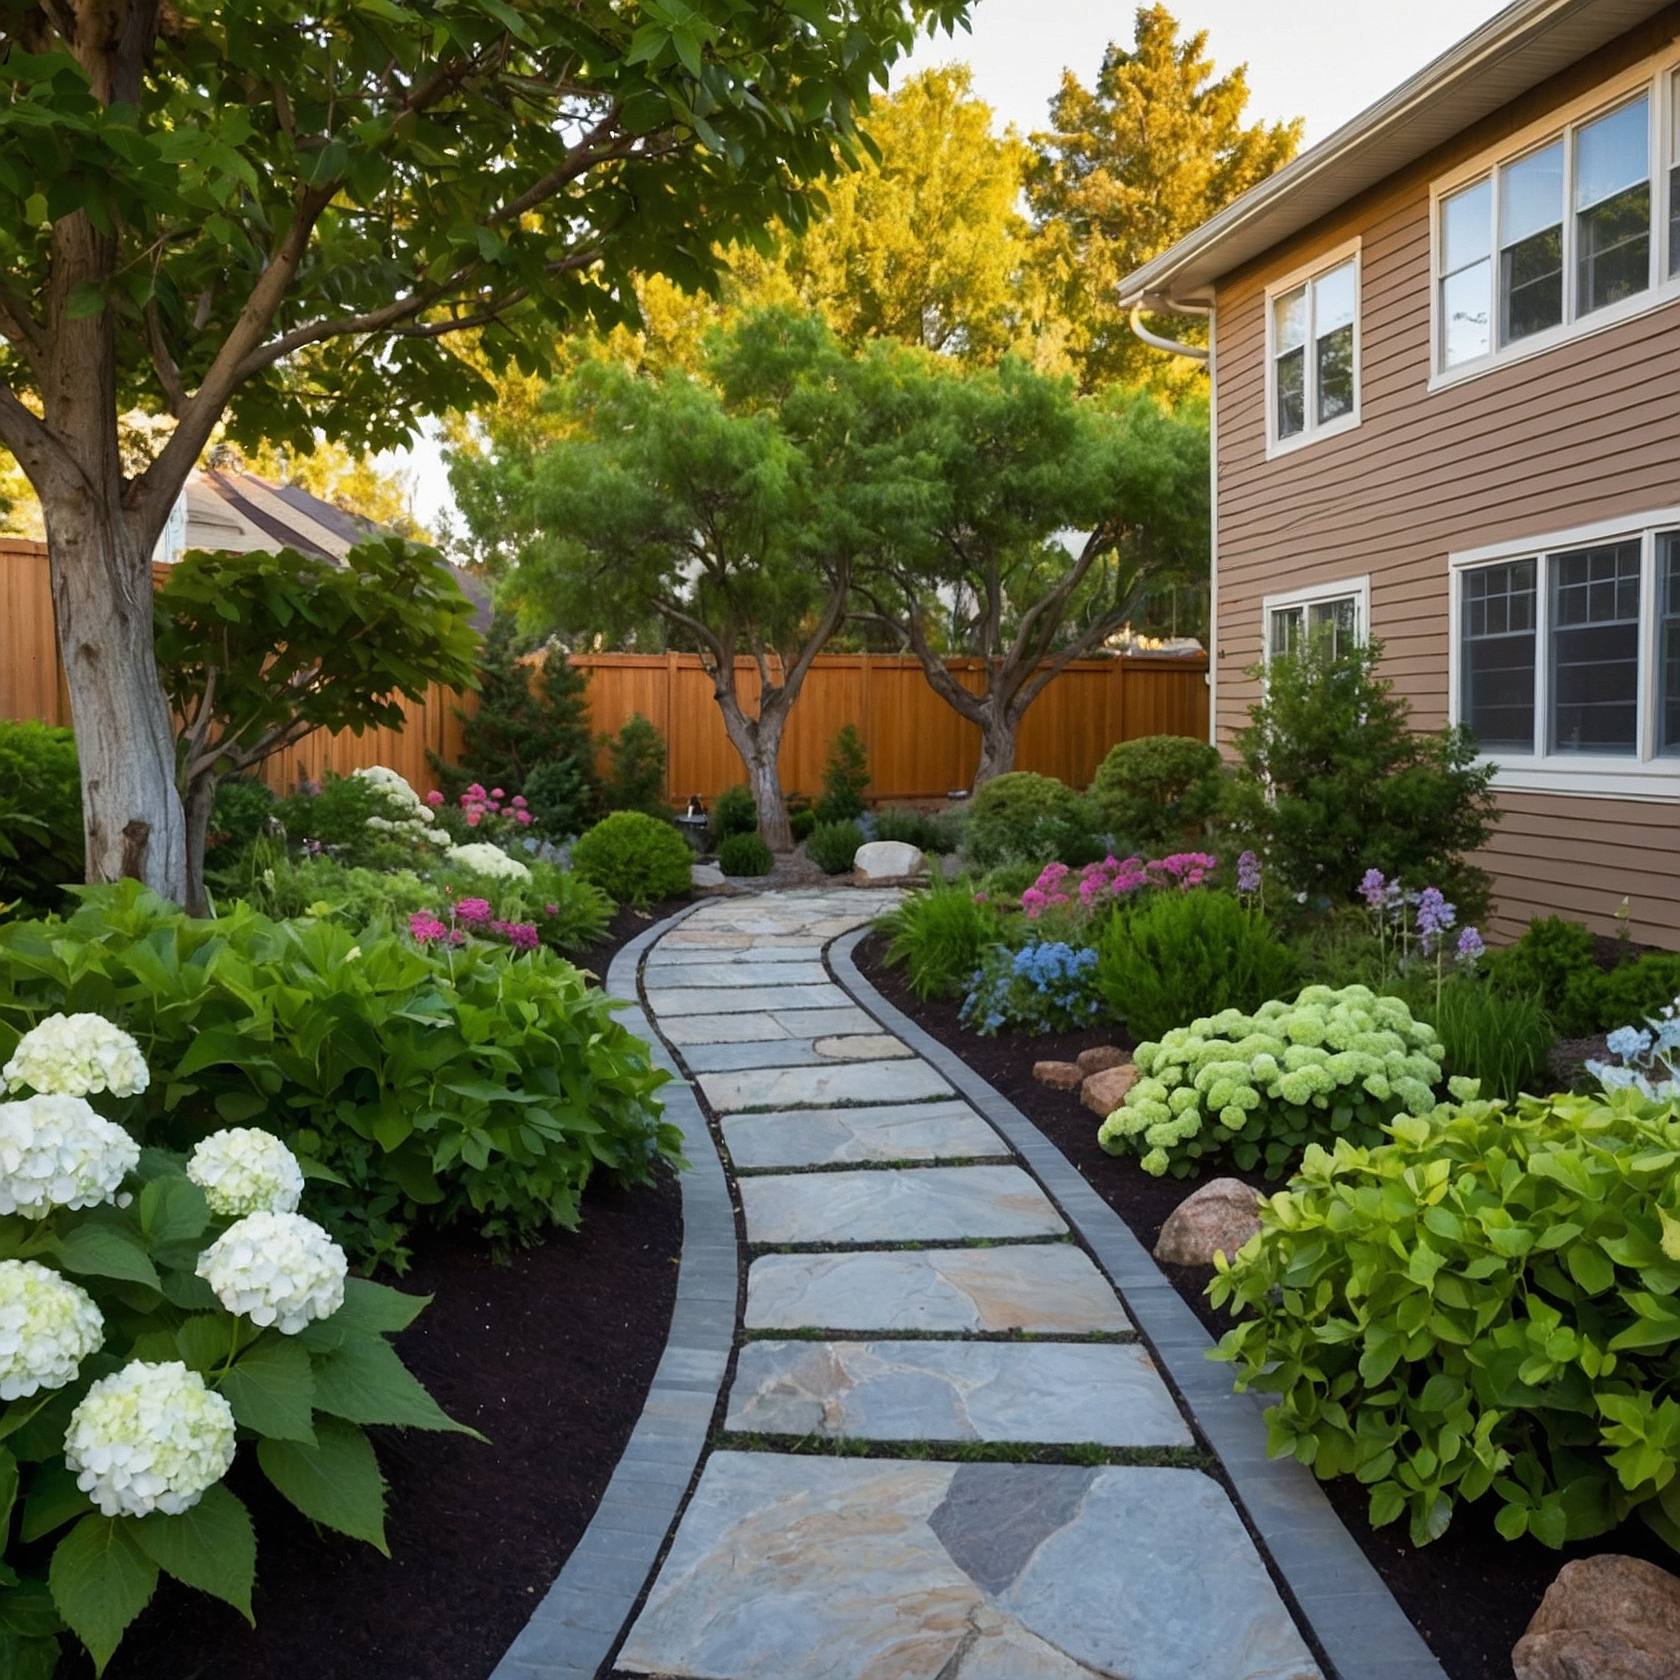 Pavers And Gravel Walkway With Flowering Bushes